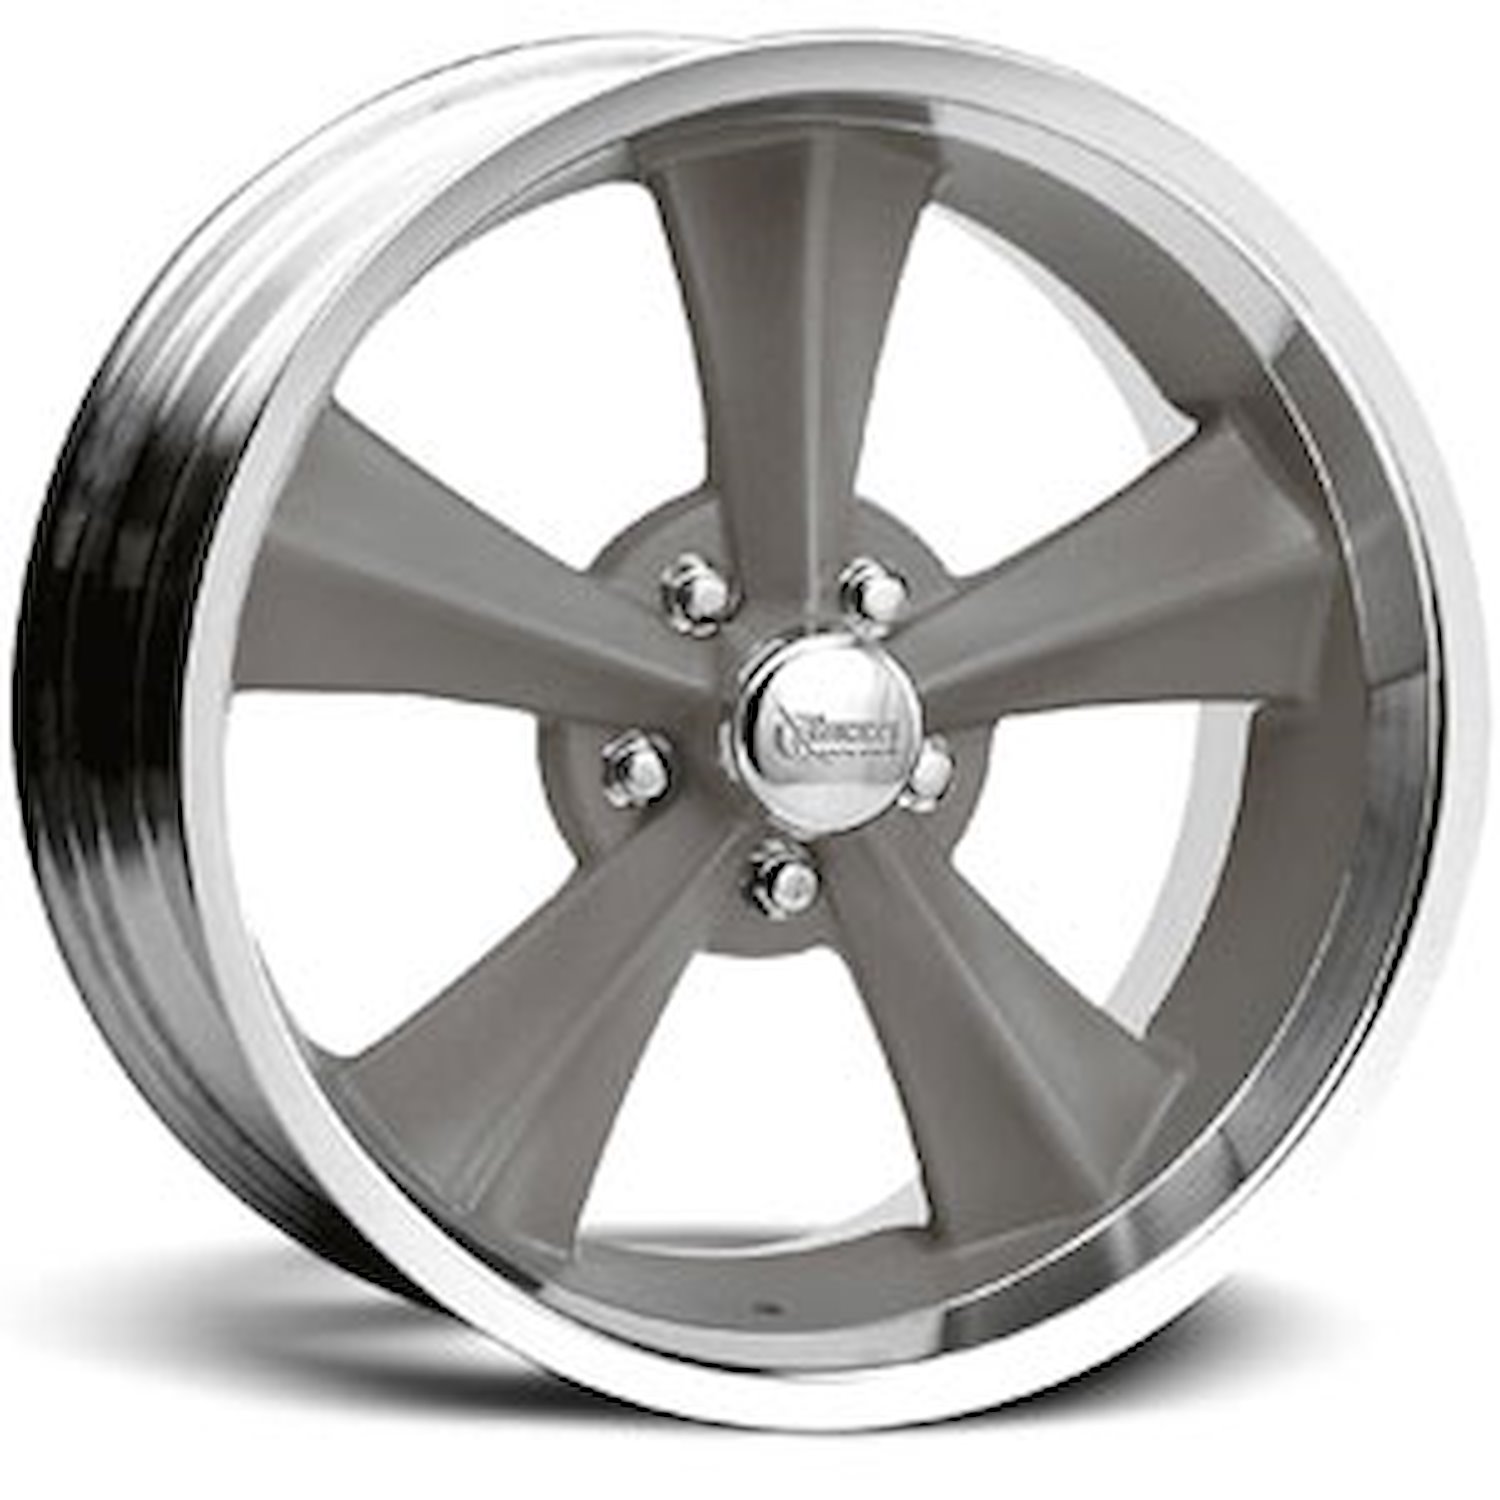 Booster Wheel - Gray Size: 18" x 8"